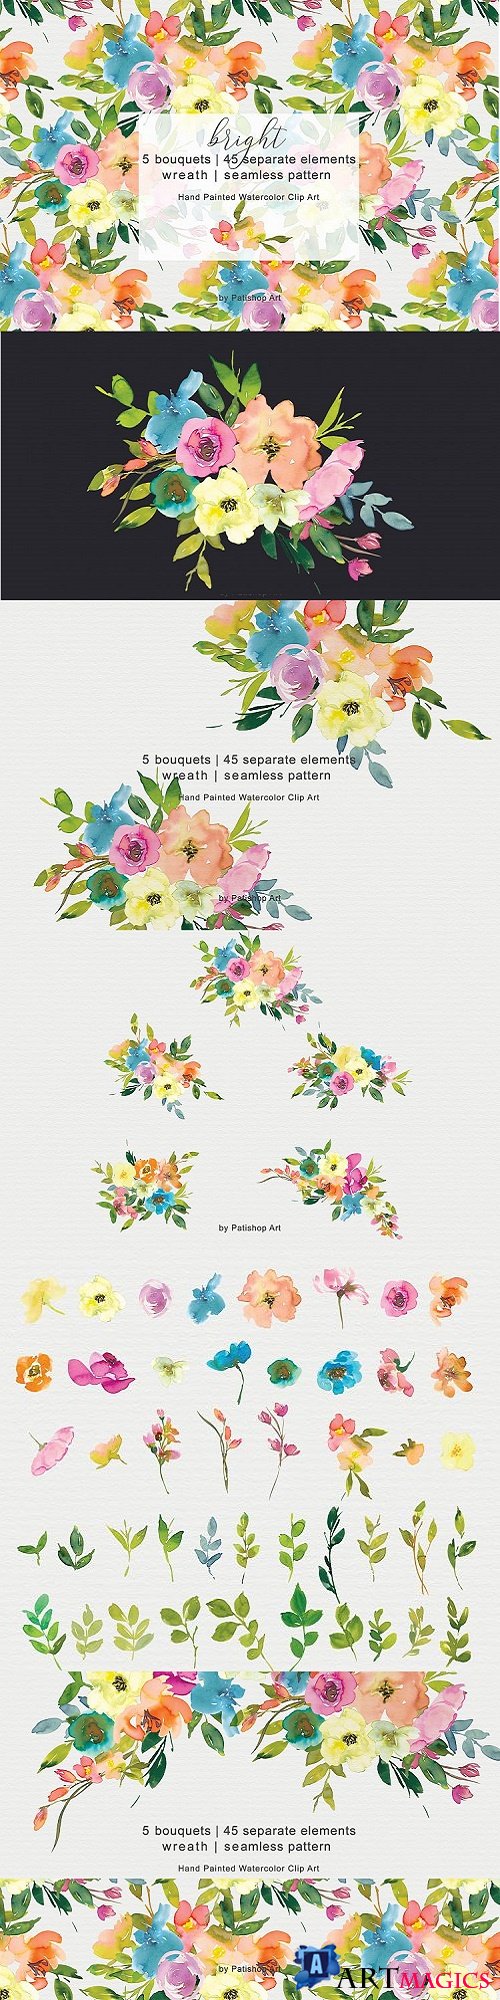 Colorful WatercolorSpring Flowers Clipart Set  - 479458